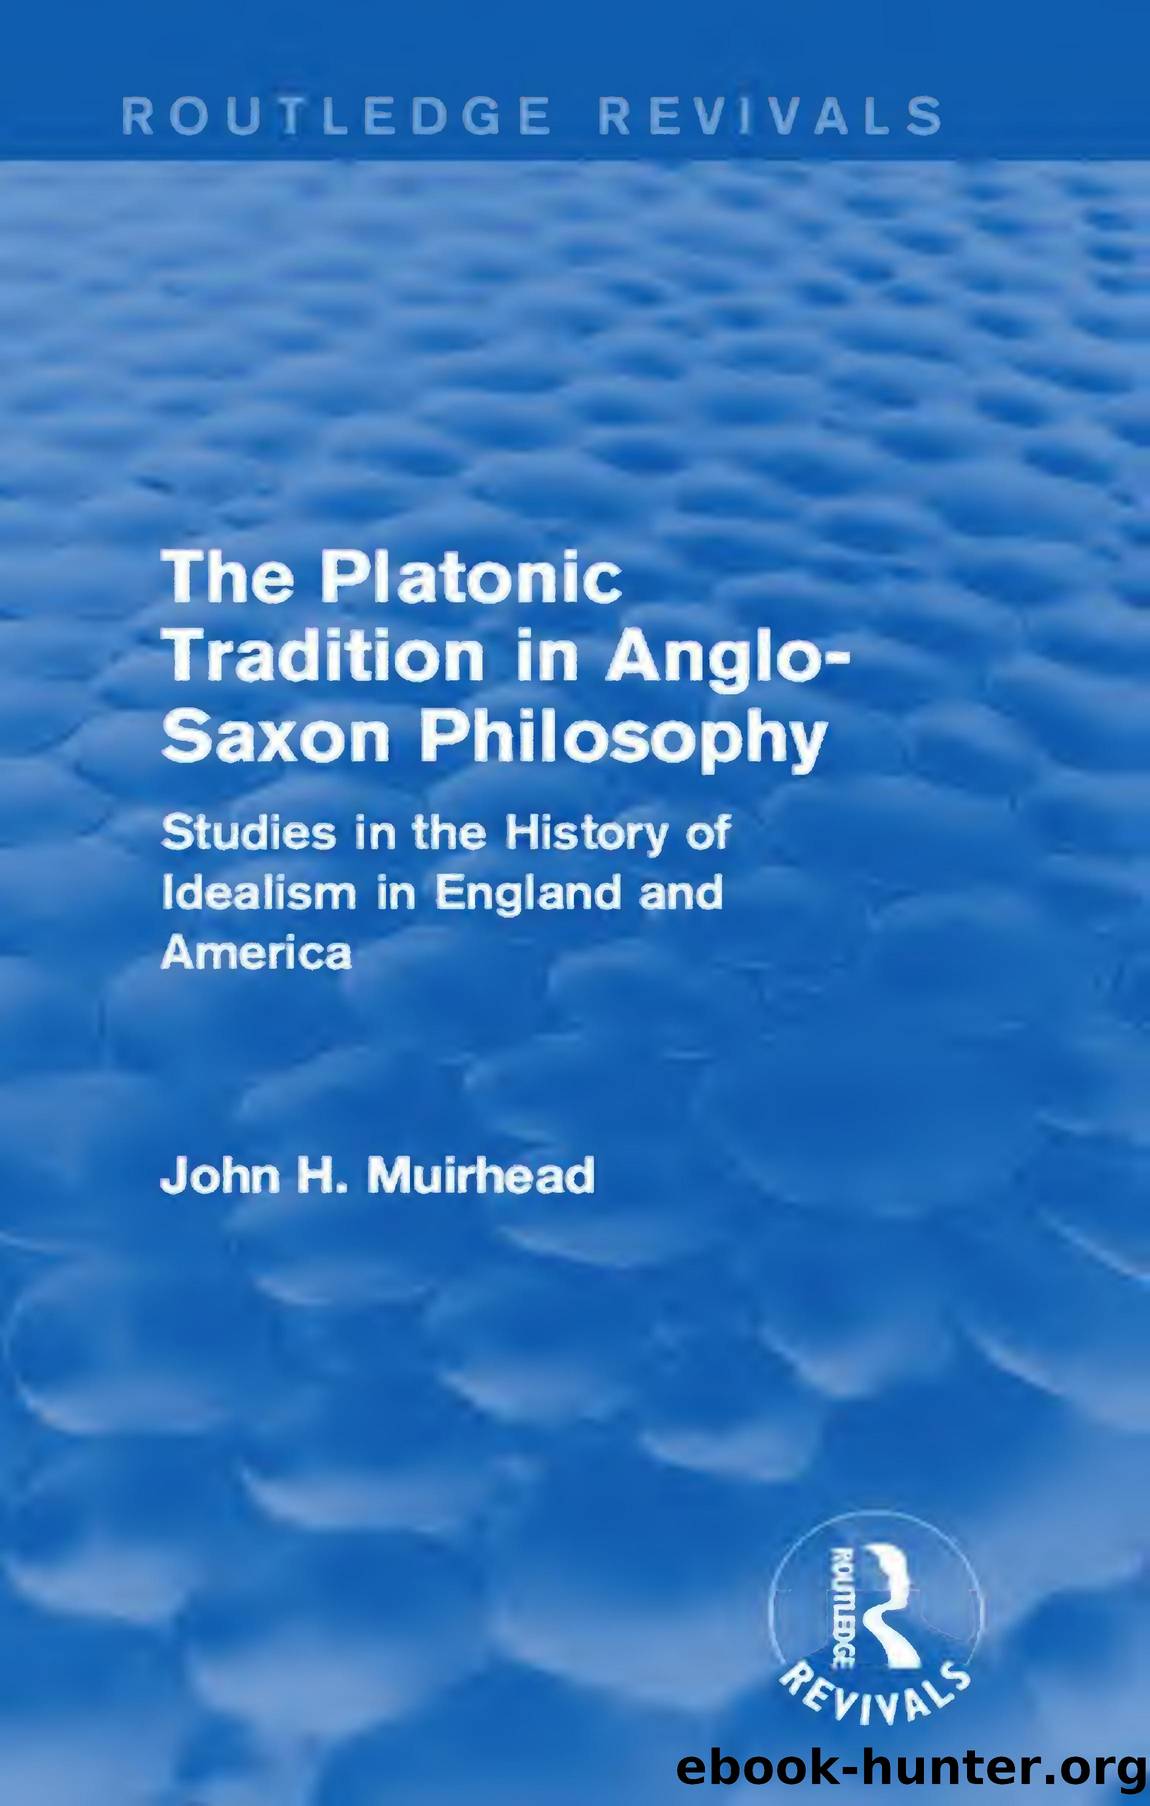 The Platonic Tradition in Anglo-Saxon Philosophy: Studies in the History of Idealism in England and America (Routledge Revivals) by John H. Muirhead